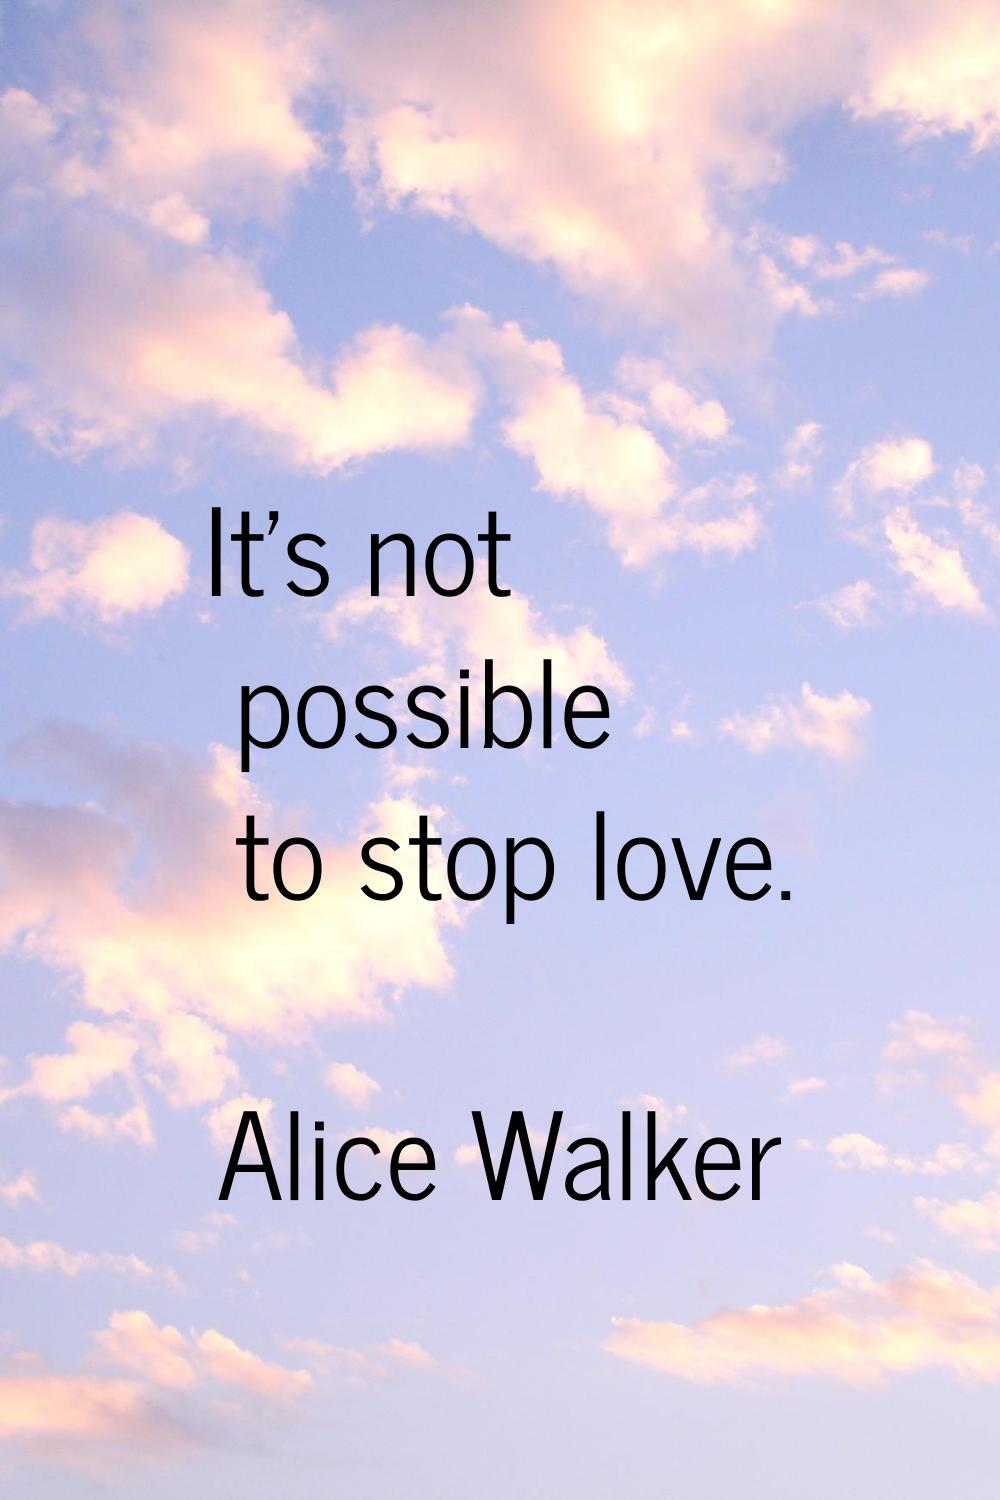 It's not possible to stop love.